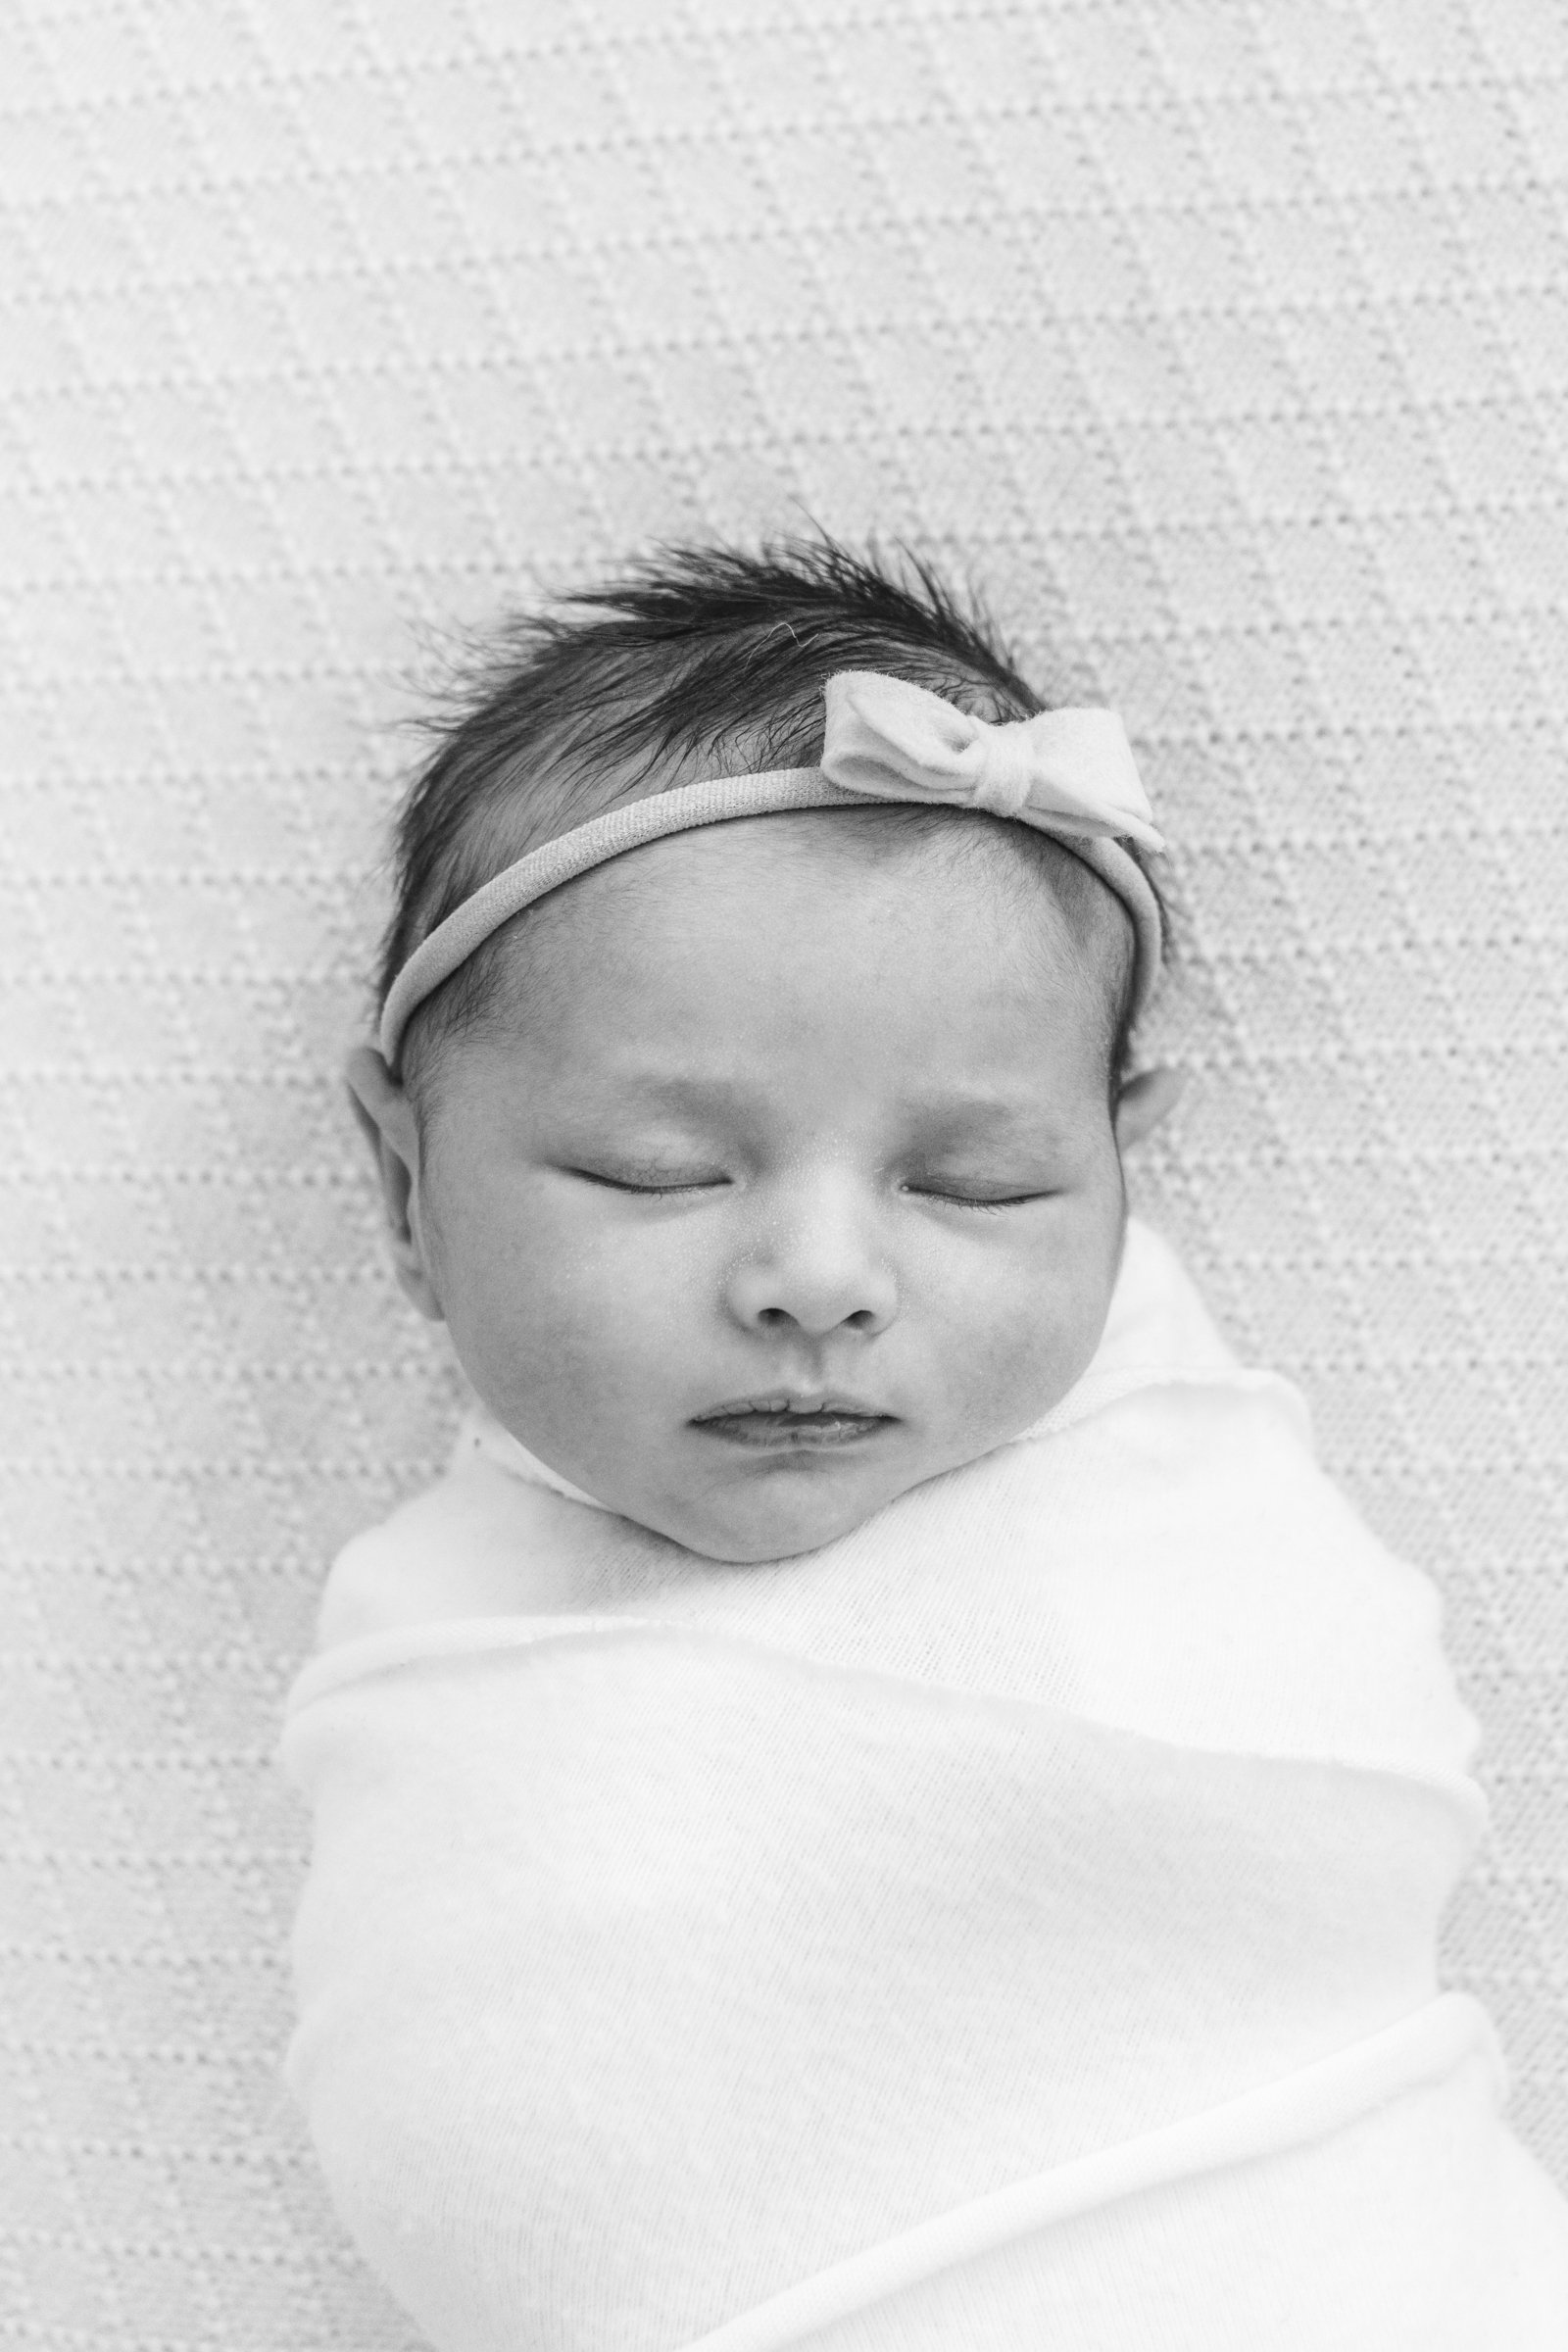  A baby girl with a nylon bow on her head and arms swaddled in a stretchy baby blanket sleeps peacefully as Nicole Hawkins Photography captures a tender moment in New Jersey. sleeping peaceful baby baby inspiration photos #nicolehawkinsphotography #n